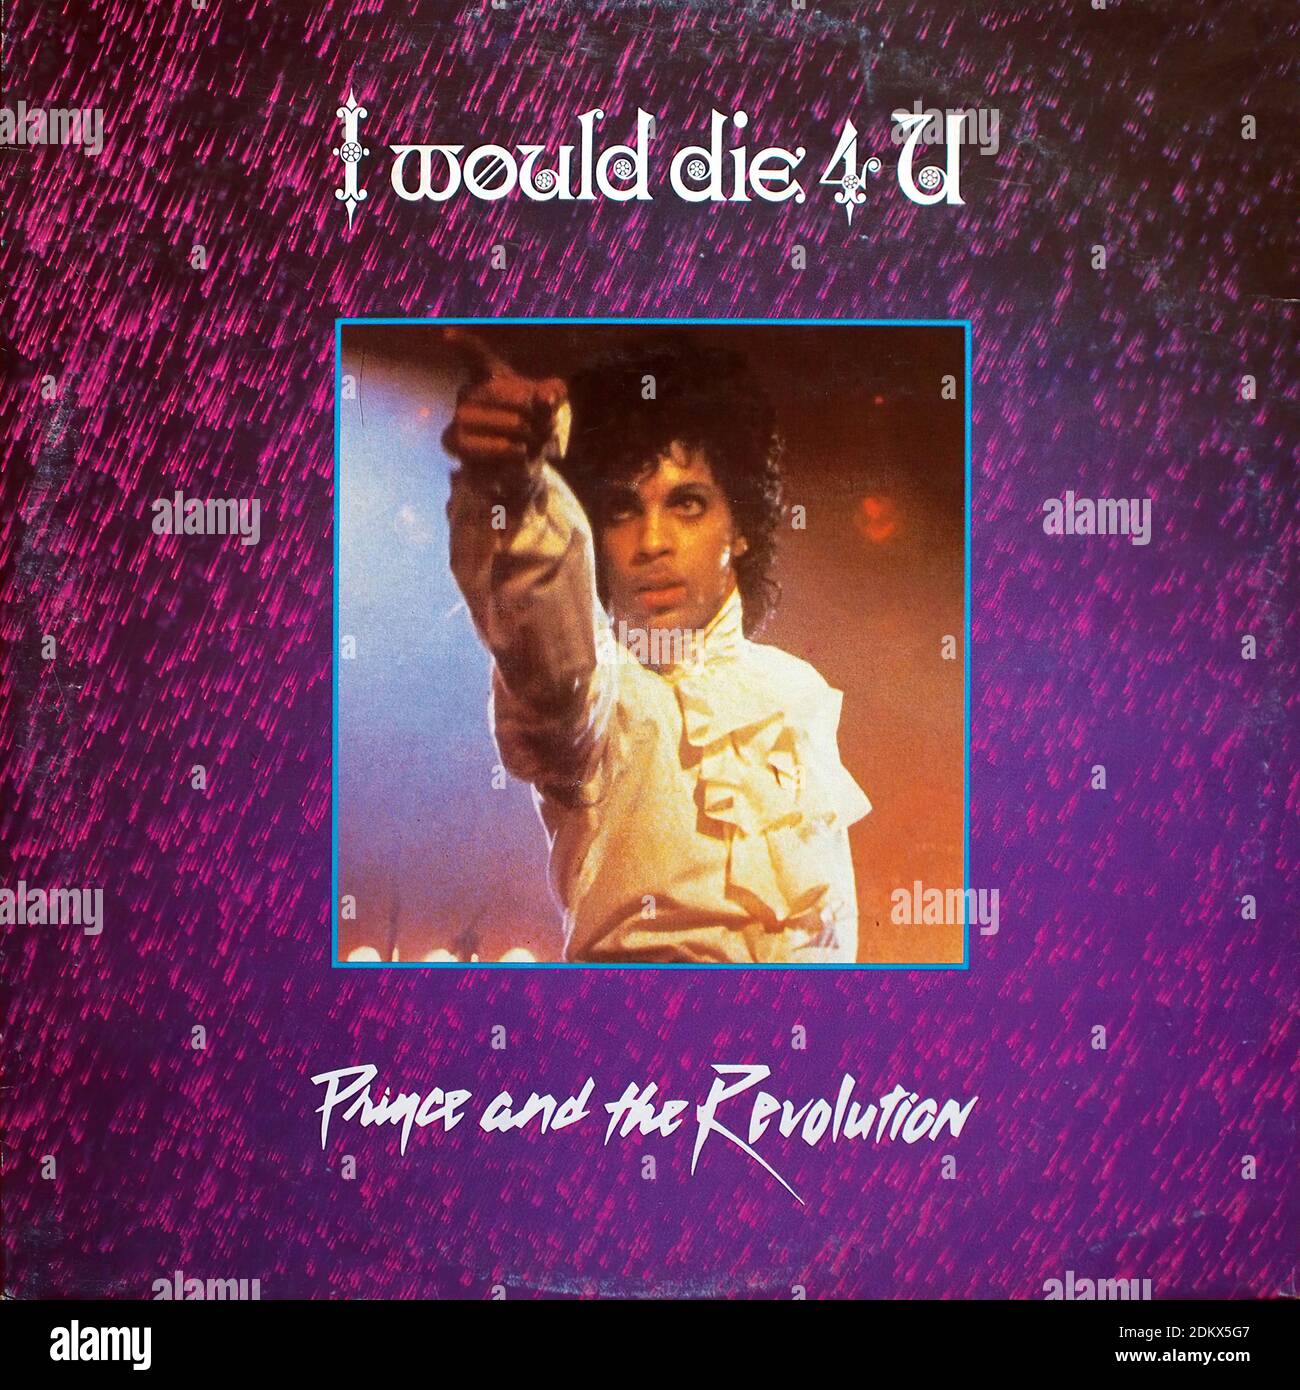 Prince - I would die 4 U, Another Lonely Christmas, Free - WB 920 297-0, 1982 1984, 12 Inch Maxi-Single 45rpm - Vintage Vinyl Album Cover Stockfoto